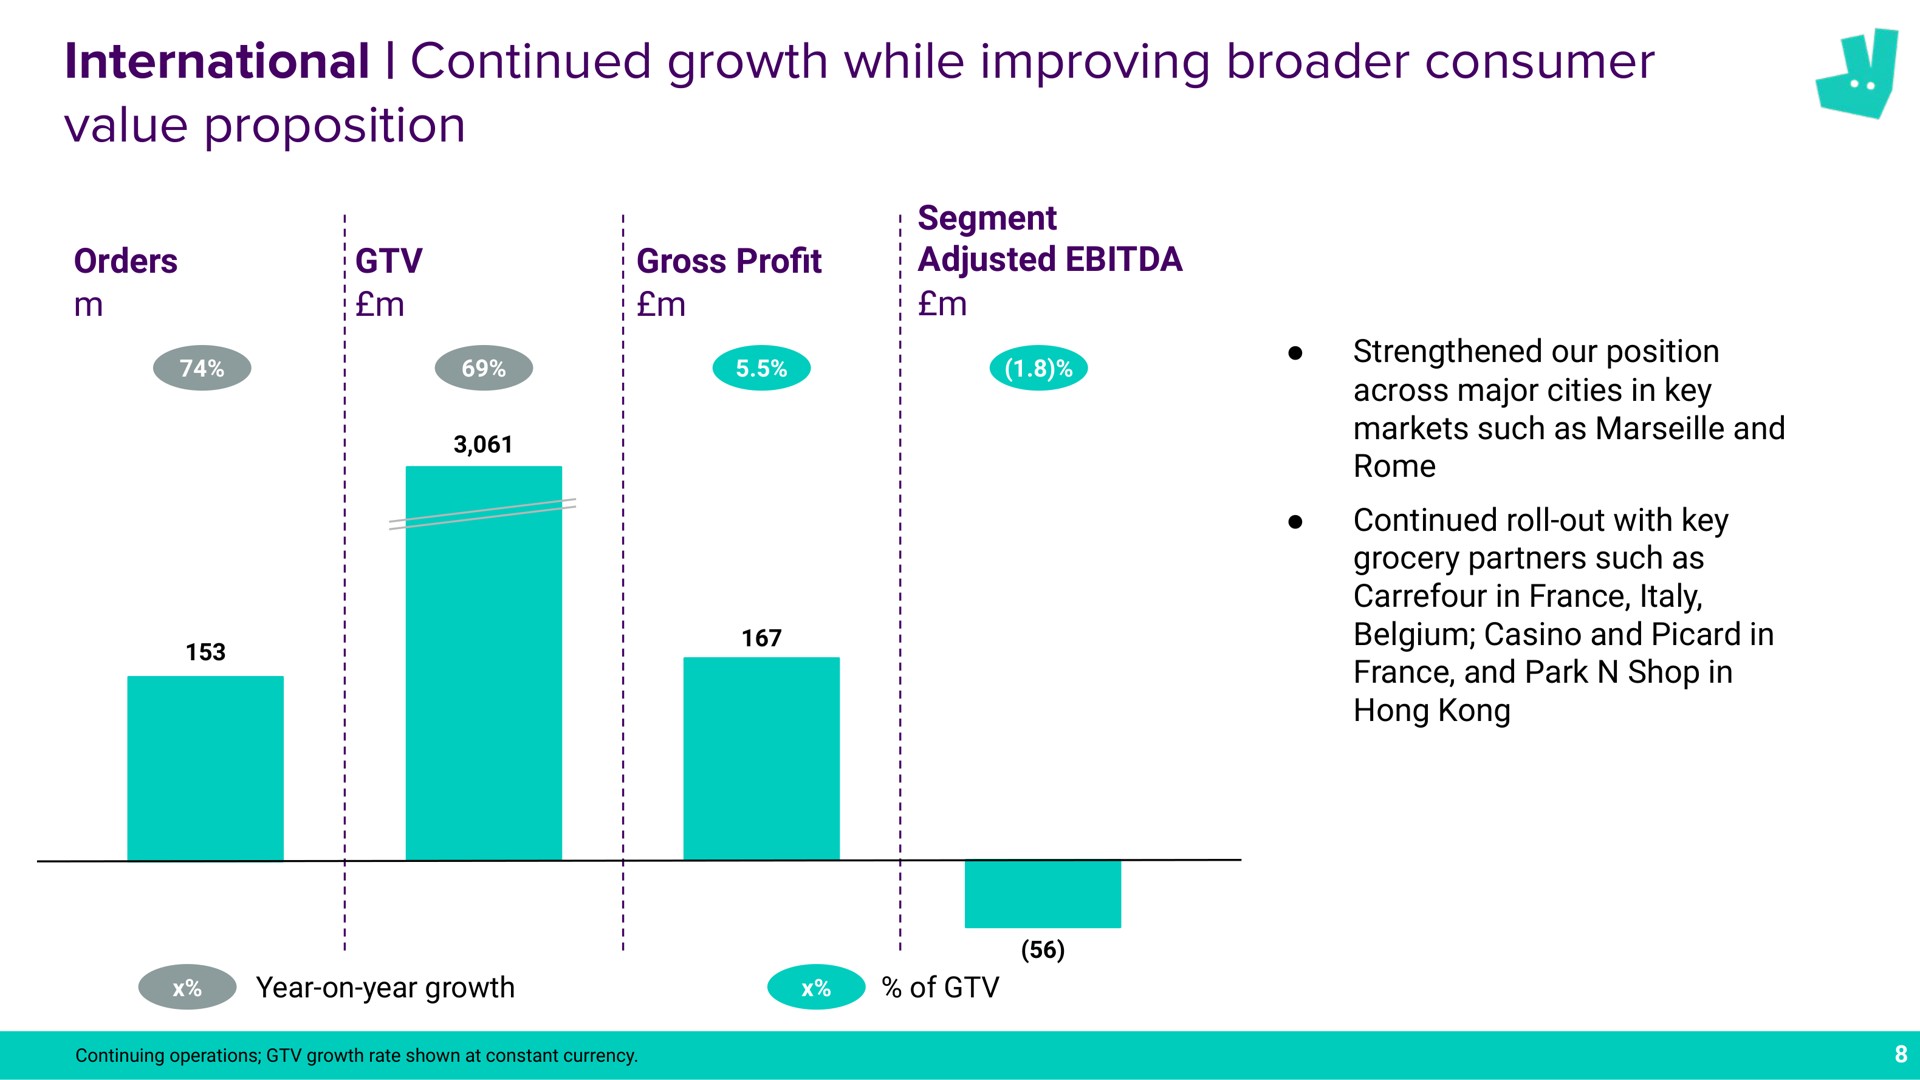 international continued growth while improving consumer value proposition a | Deliveroo